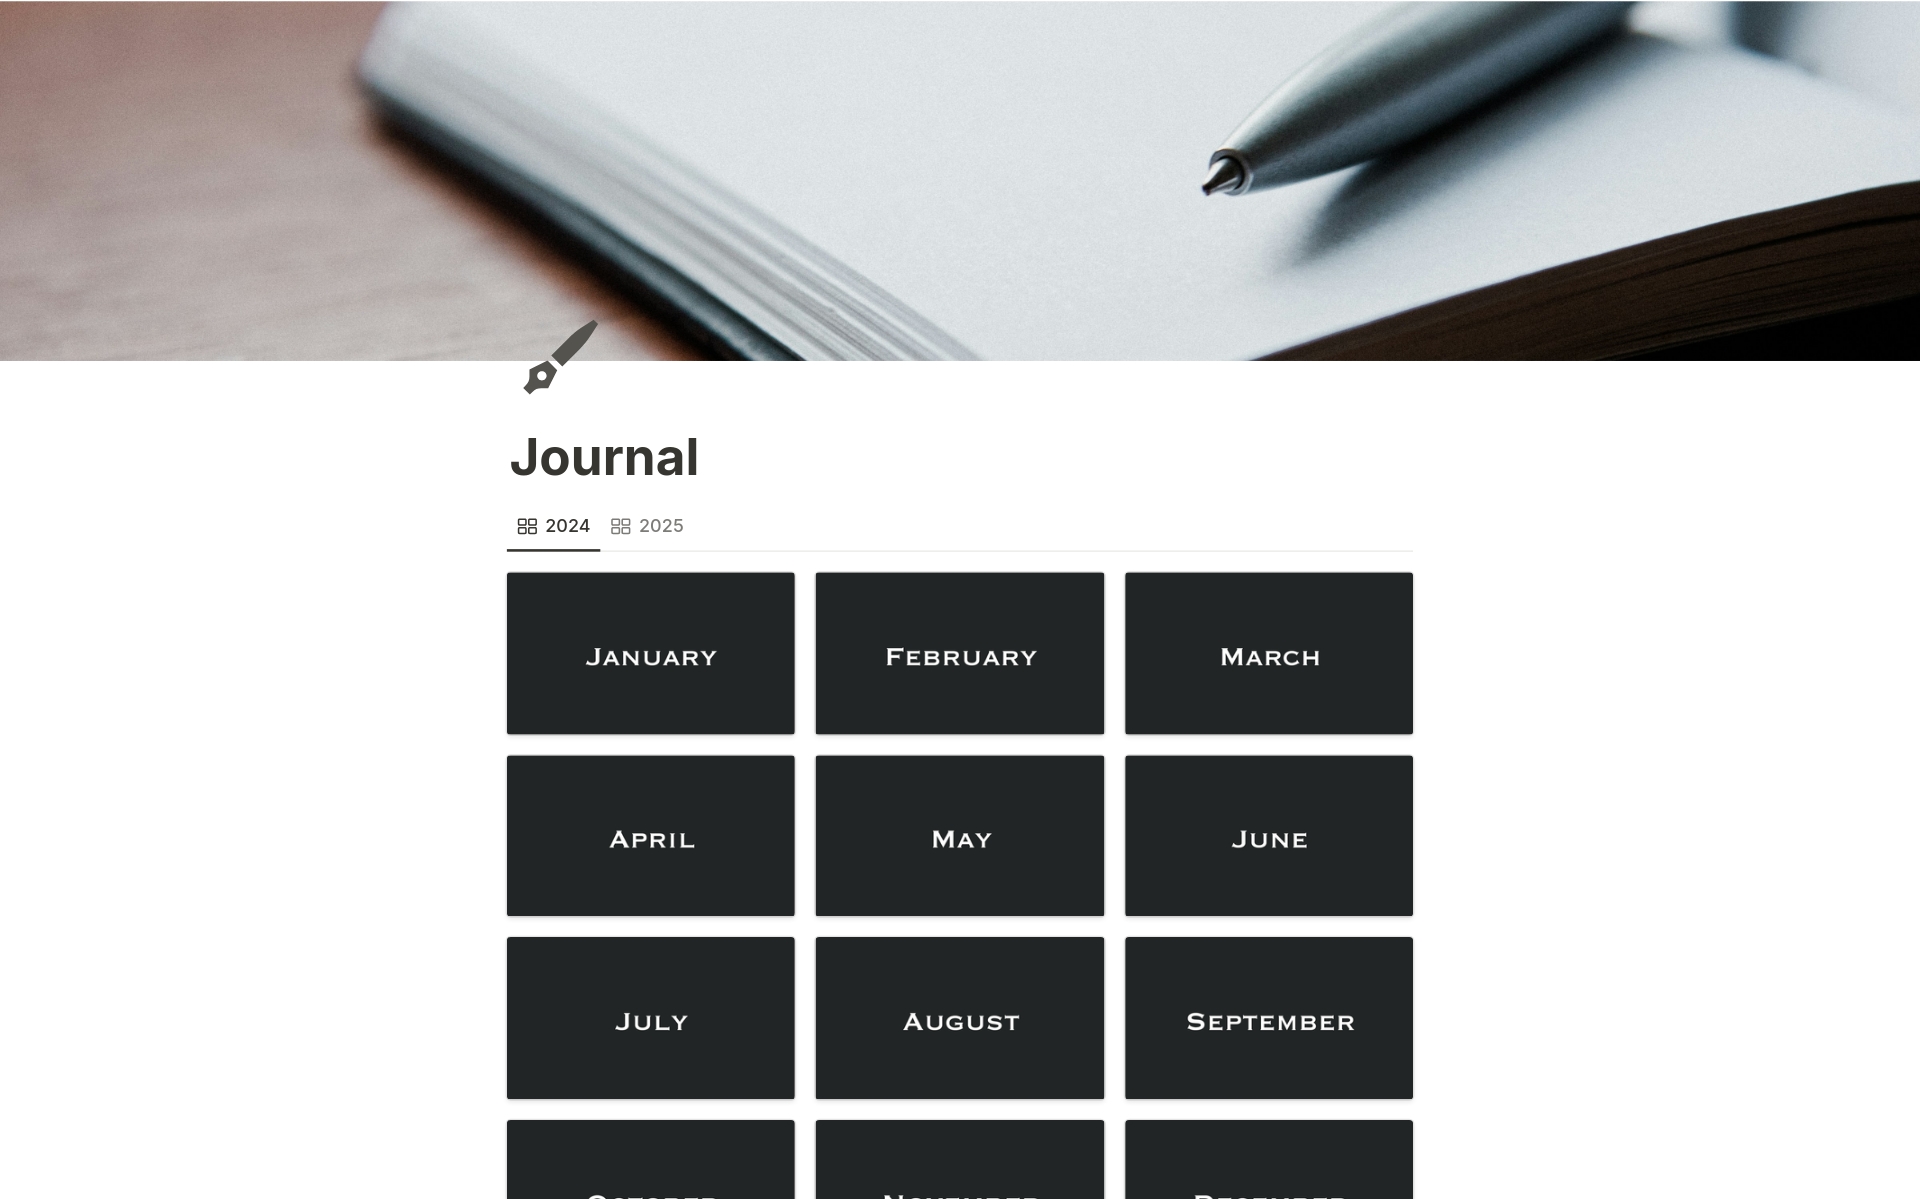 If you like to write journals, this is the best template for you.